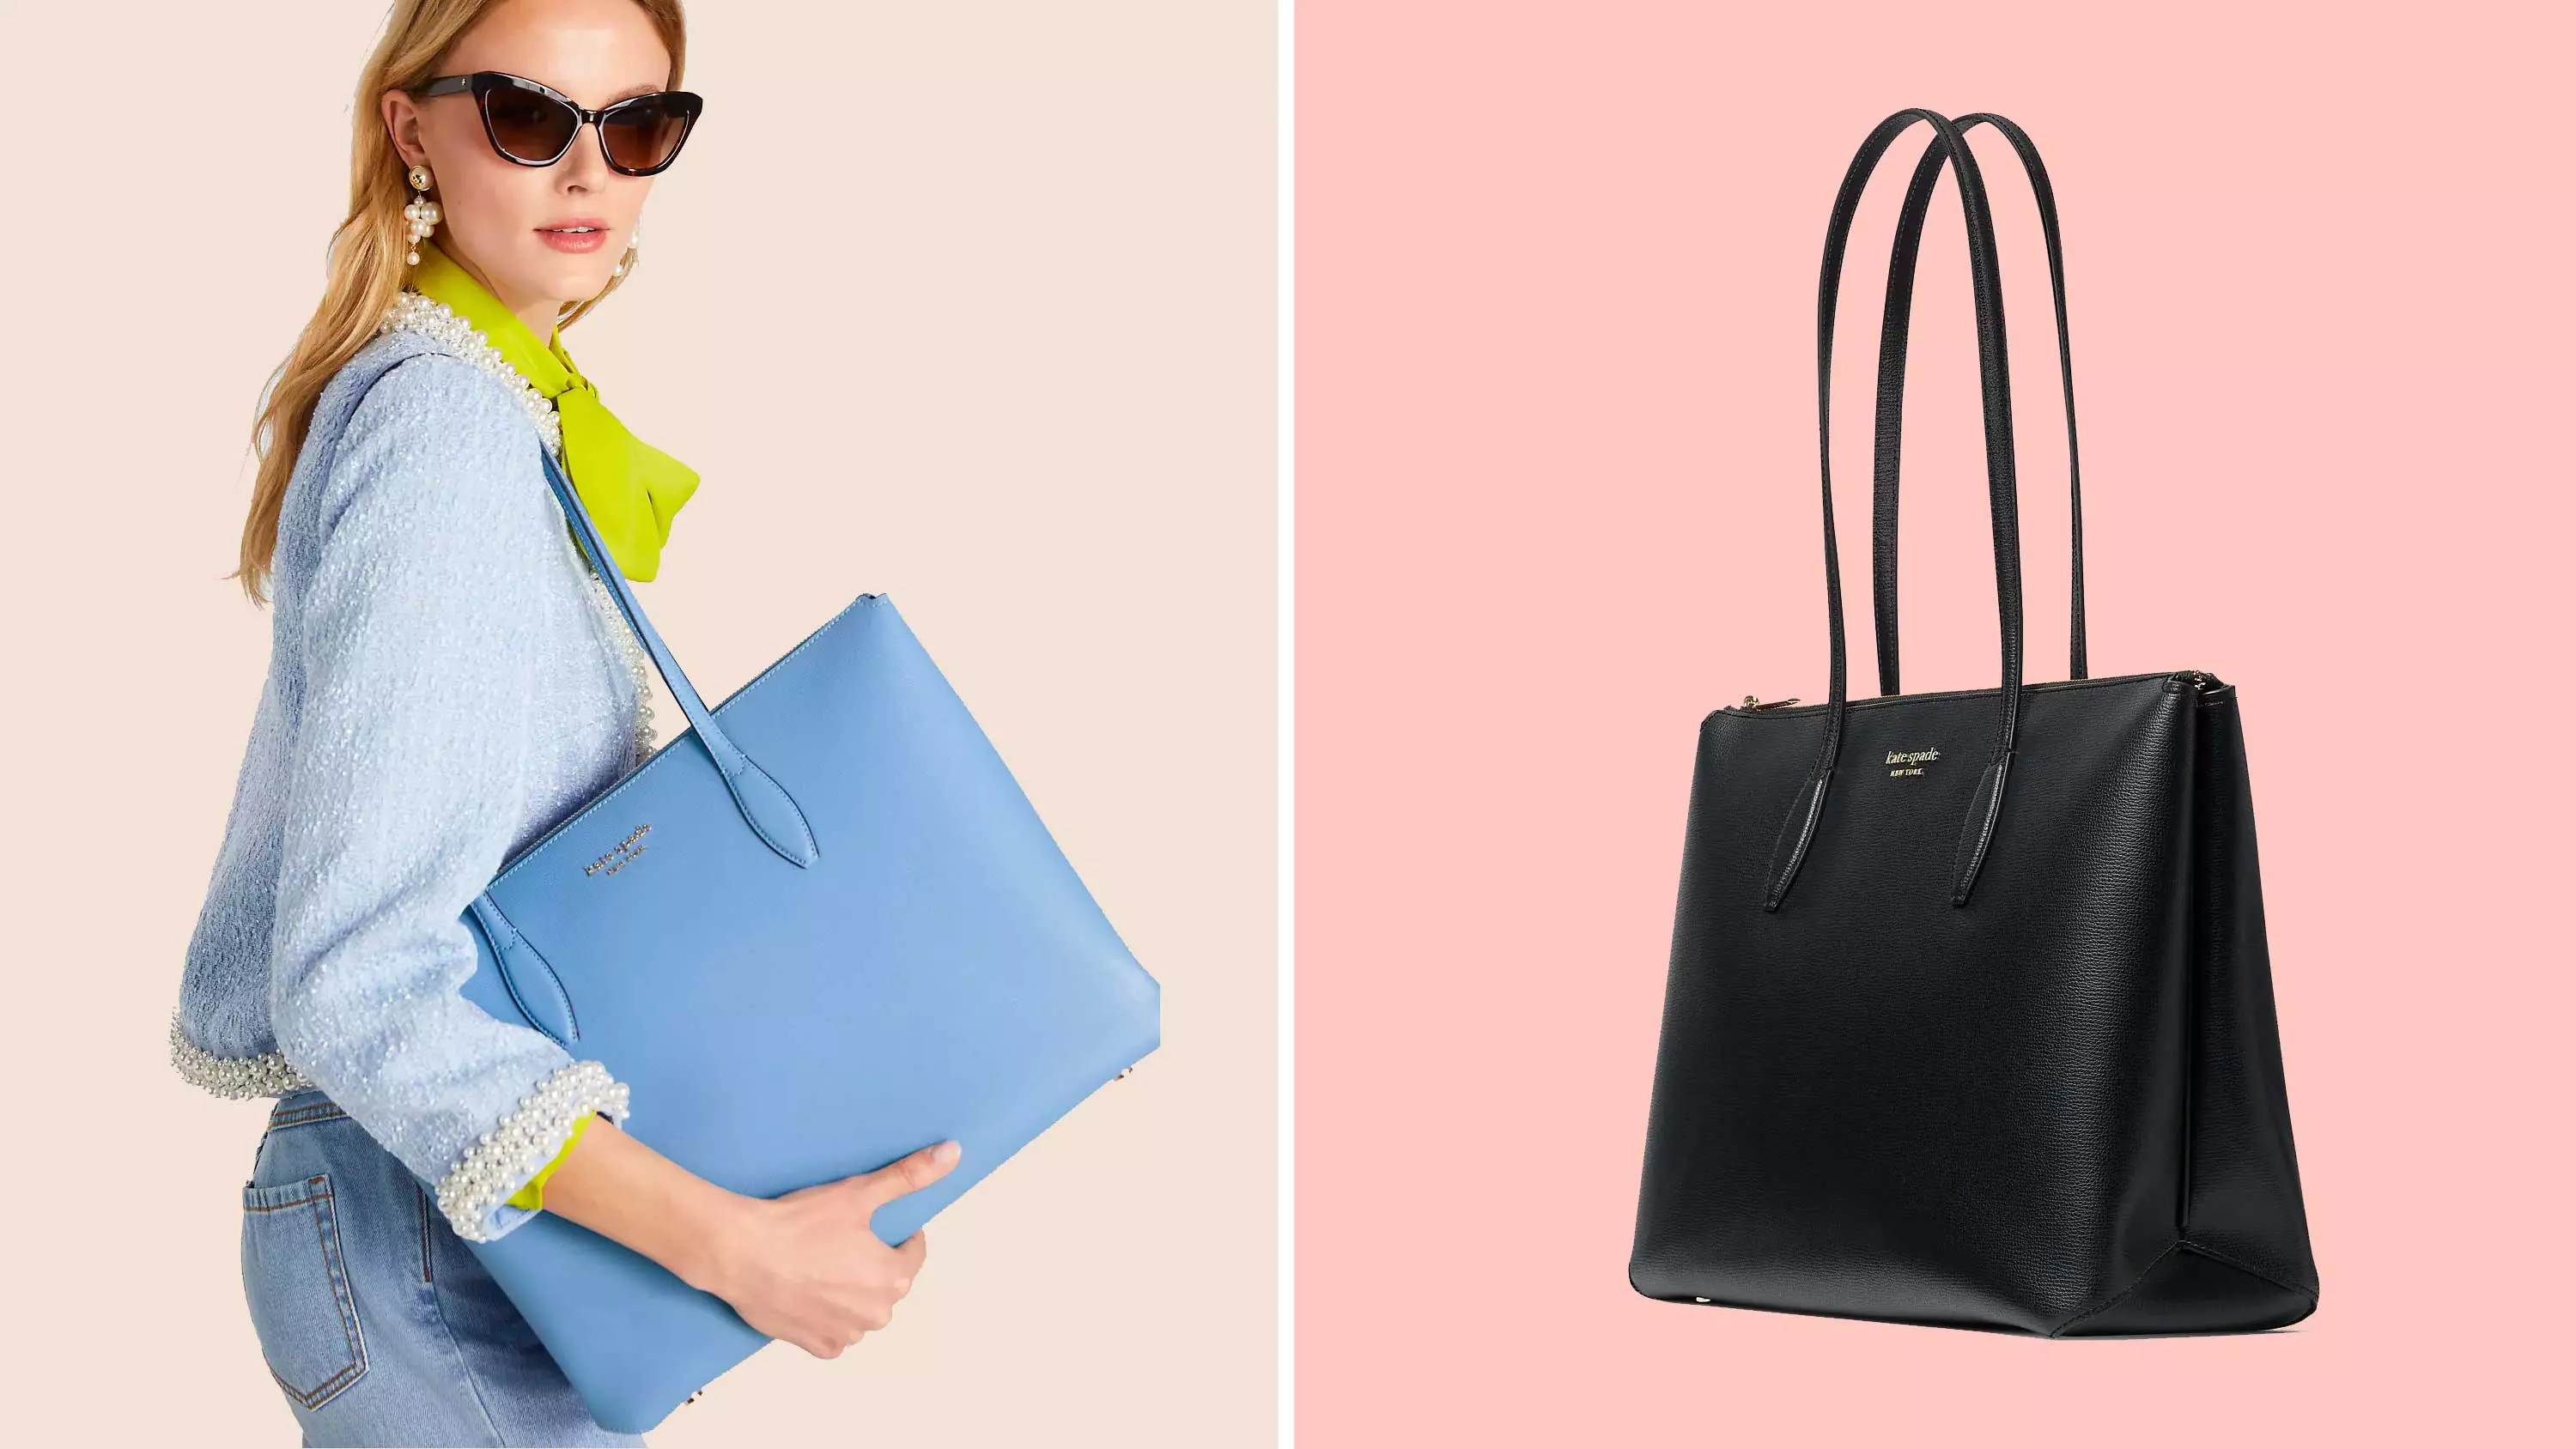 You can fit everything you need in this large Kate Spade tote.